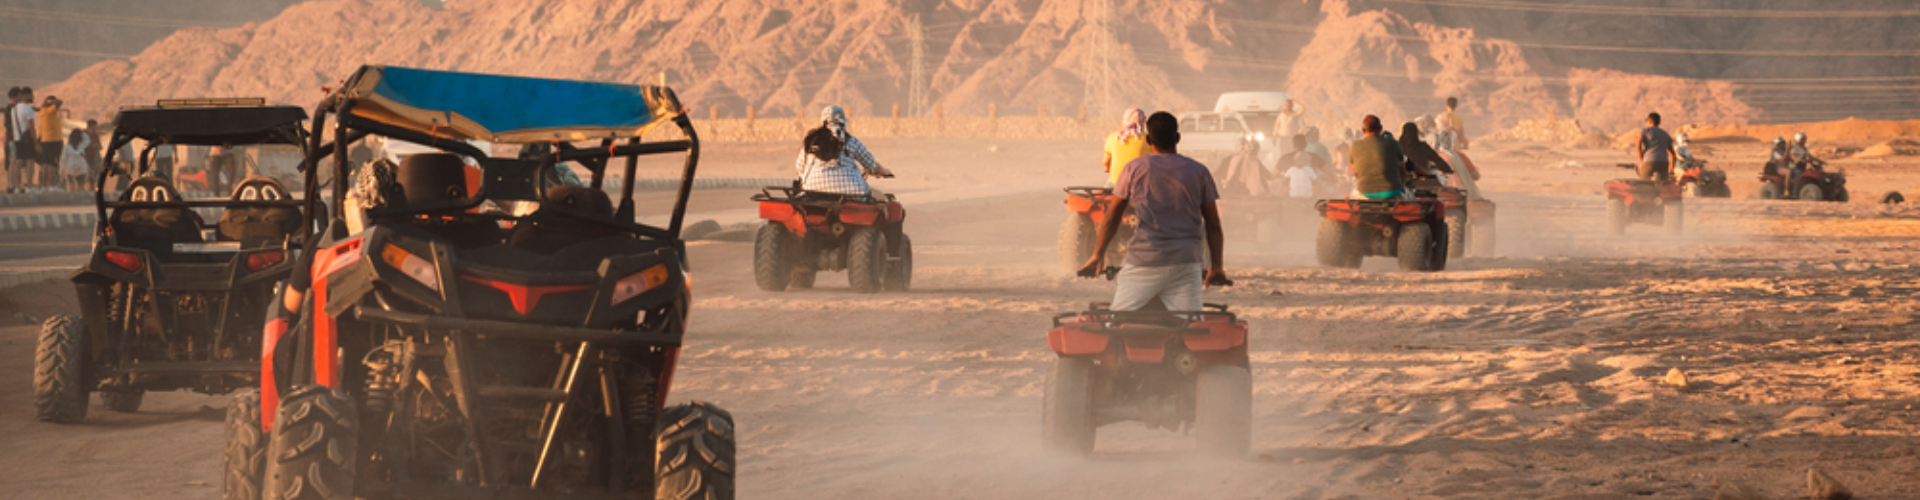 Hurghada: Quad or Buggy Tour Along the Sea and Mountains